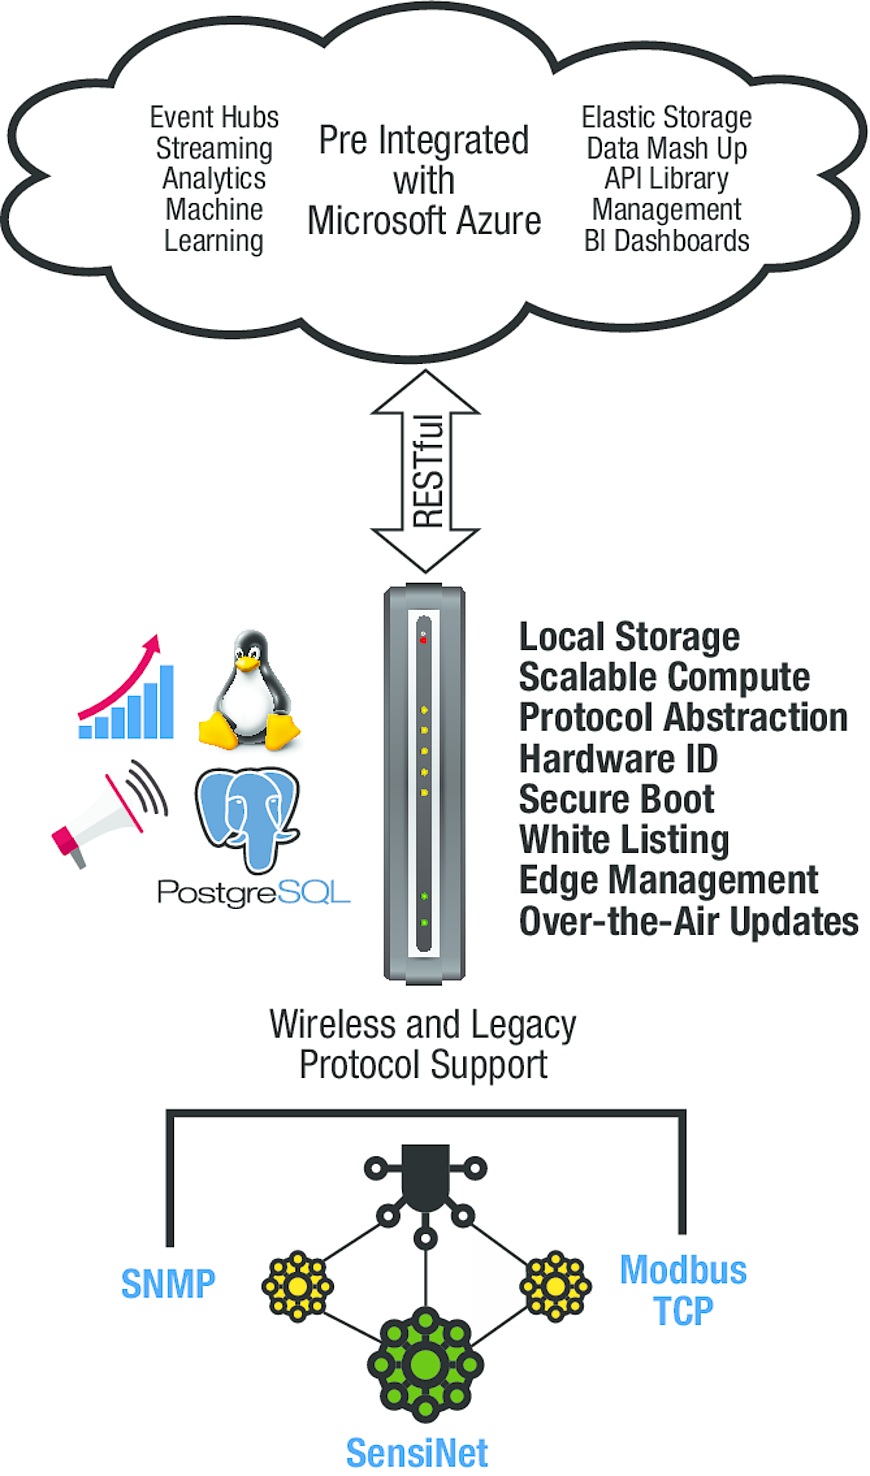 The gateways' onboard web server provides broad protocol support to make integration simple.